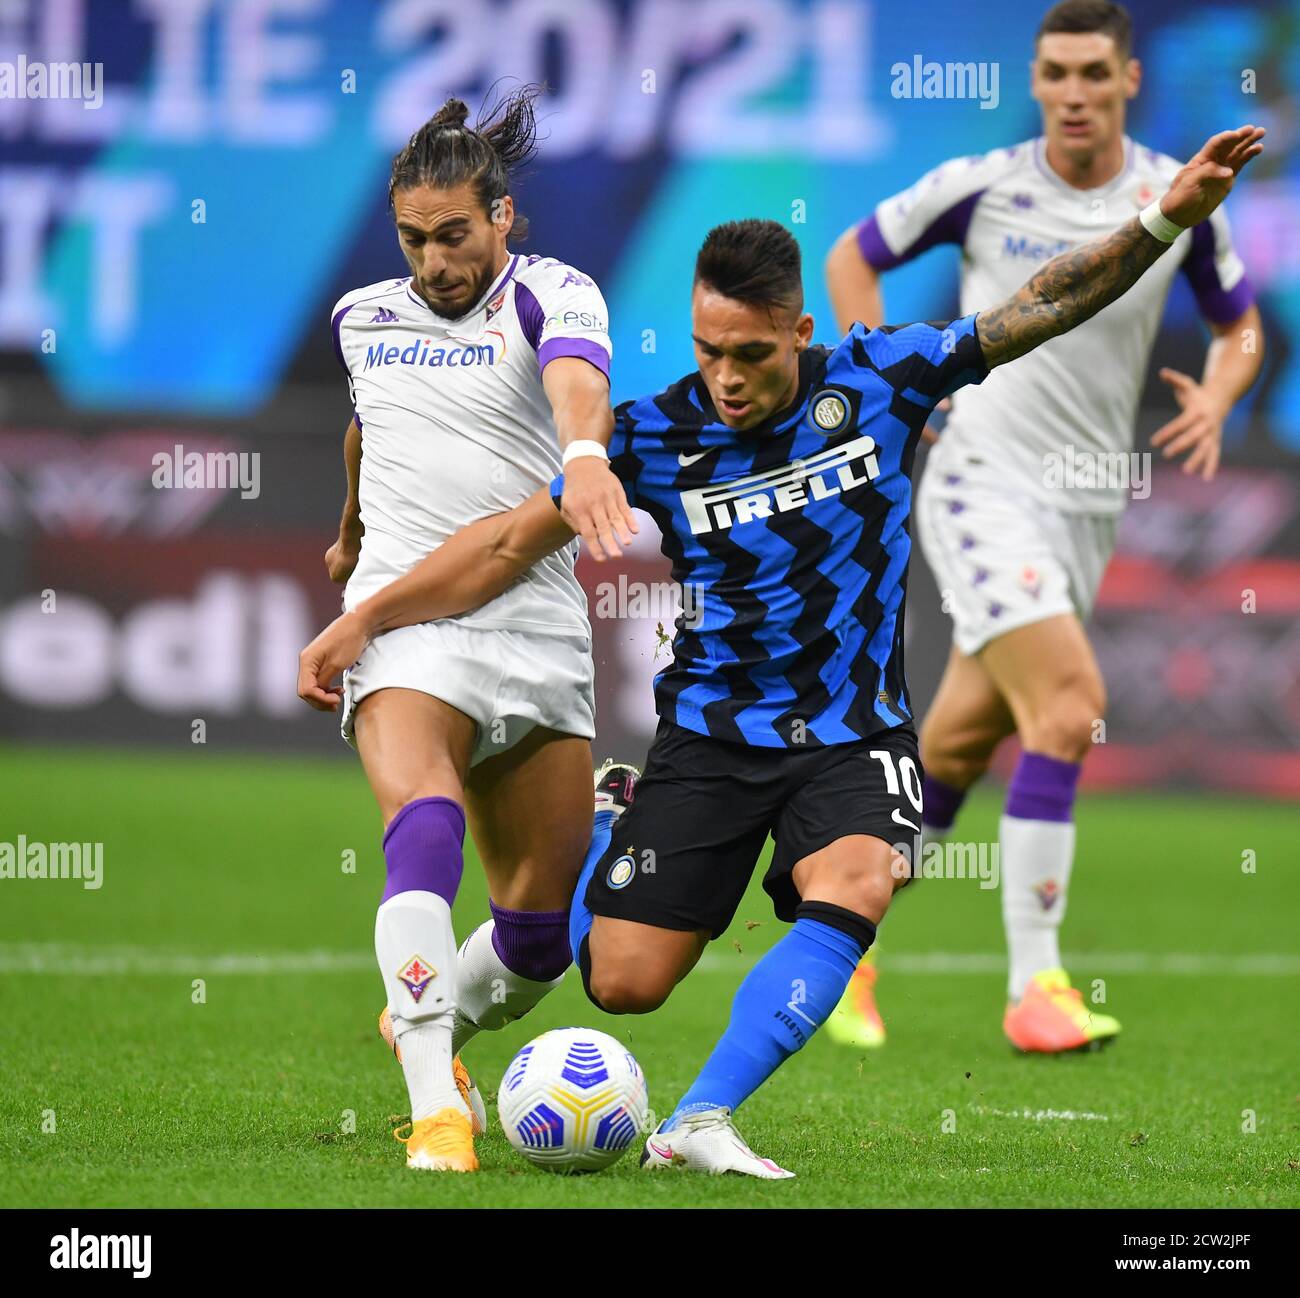 Milan, Italy. 26th Sep, 2020. FC Inter's Lautaro Martinez (R) vies with Fiorentina's Martin Caceres during a Serie A soccer match between FC Inter and Fiorentina in Milan, Italy, Sept. 26, 2020. Credit: Alberto Lingria/Xinhua/Alamy Live News Stock Photo